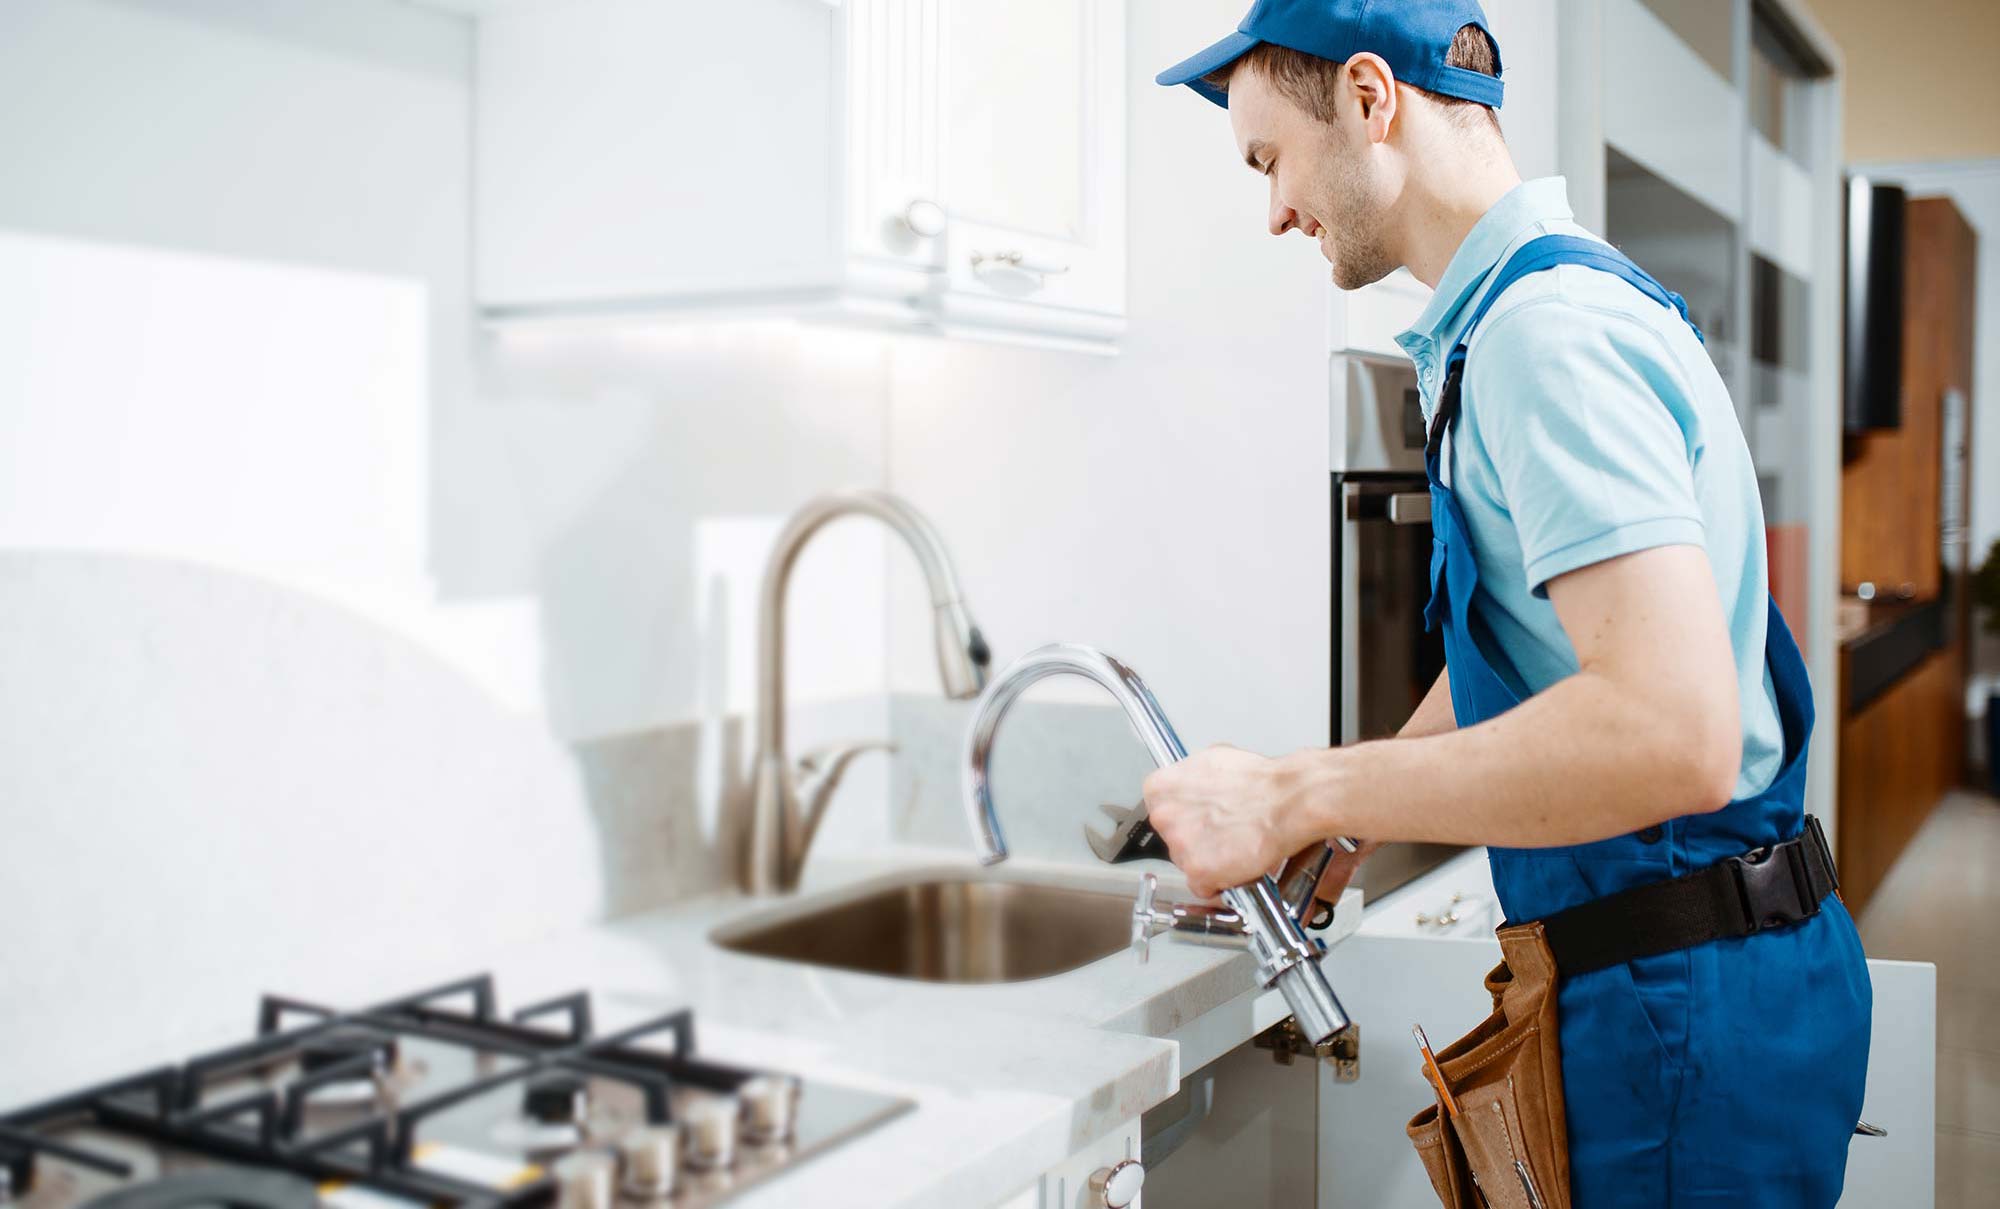 plumber-in-uniform-changes-faucet-in-the-kitchen-resize-1.jpg